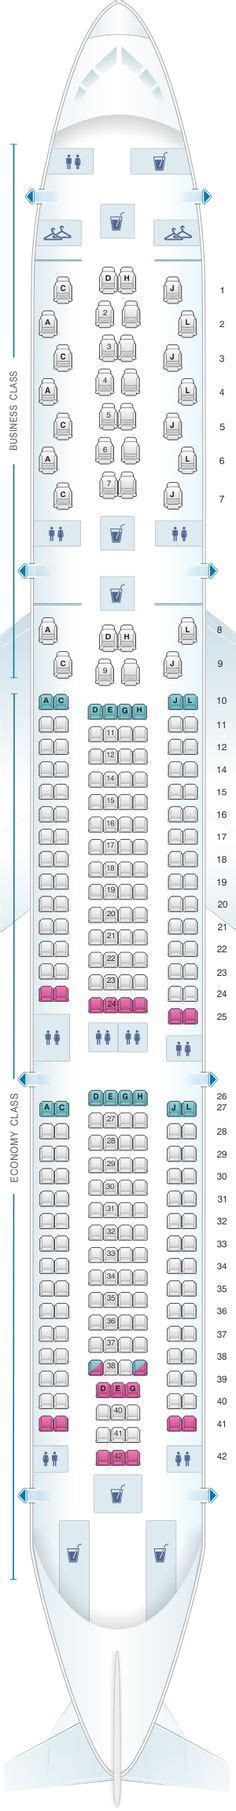 A350 900 Sas Seat Map This Aircraft Flies 300 Passengers In A